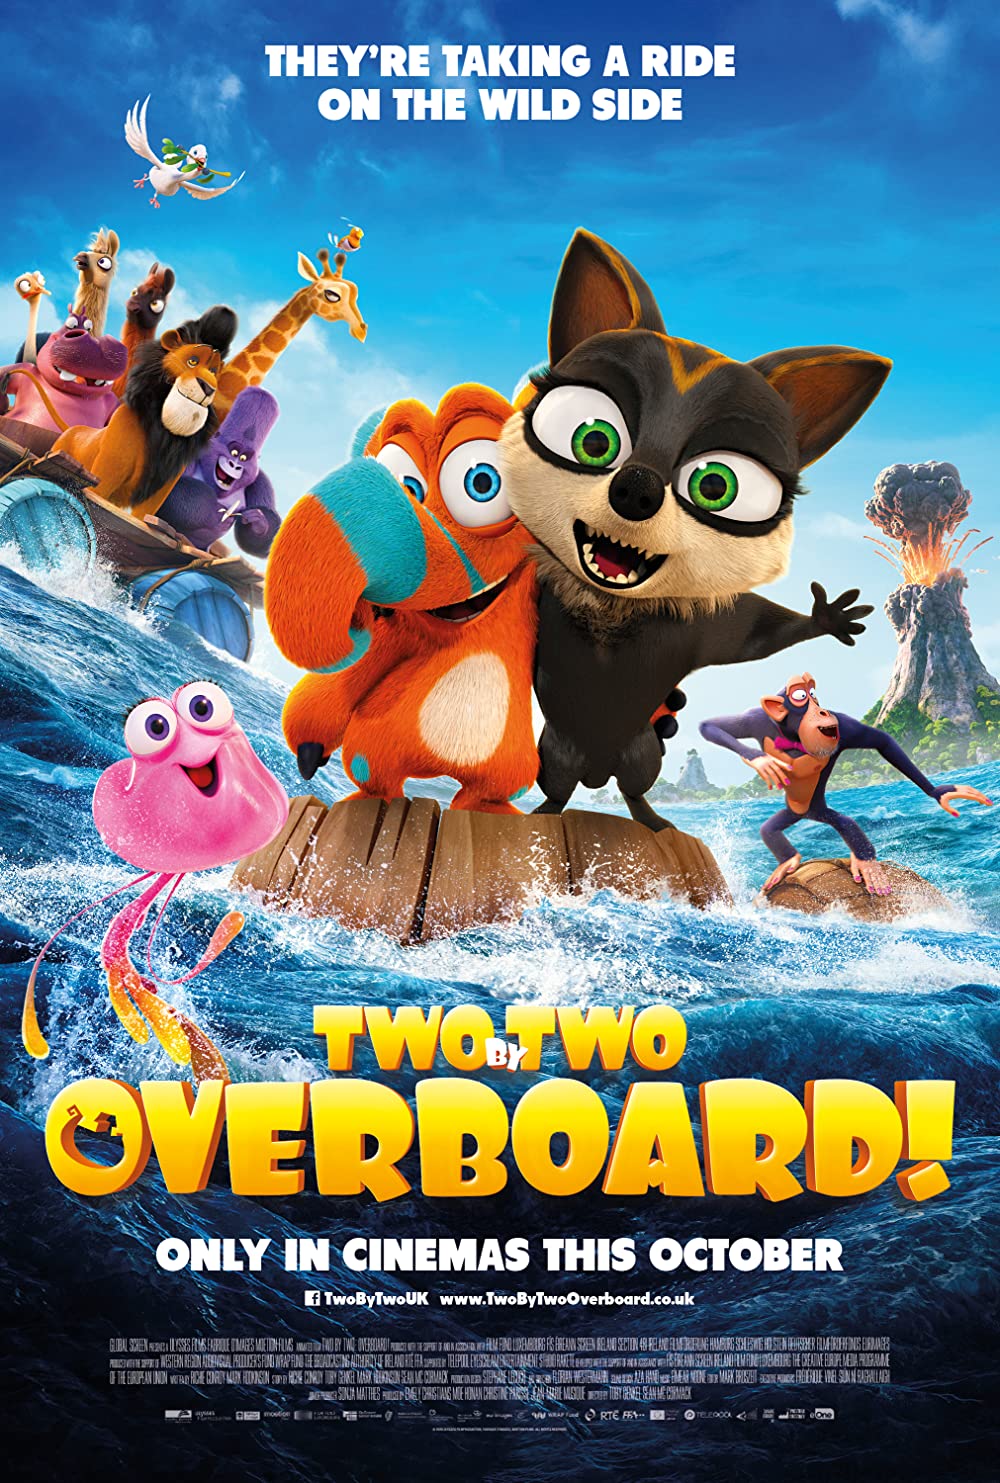 Two by Two: Overboard! (2021)